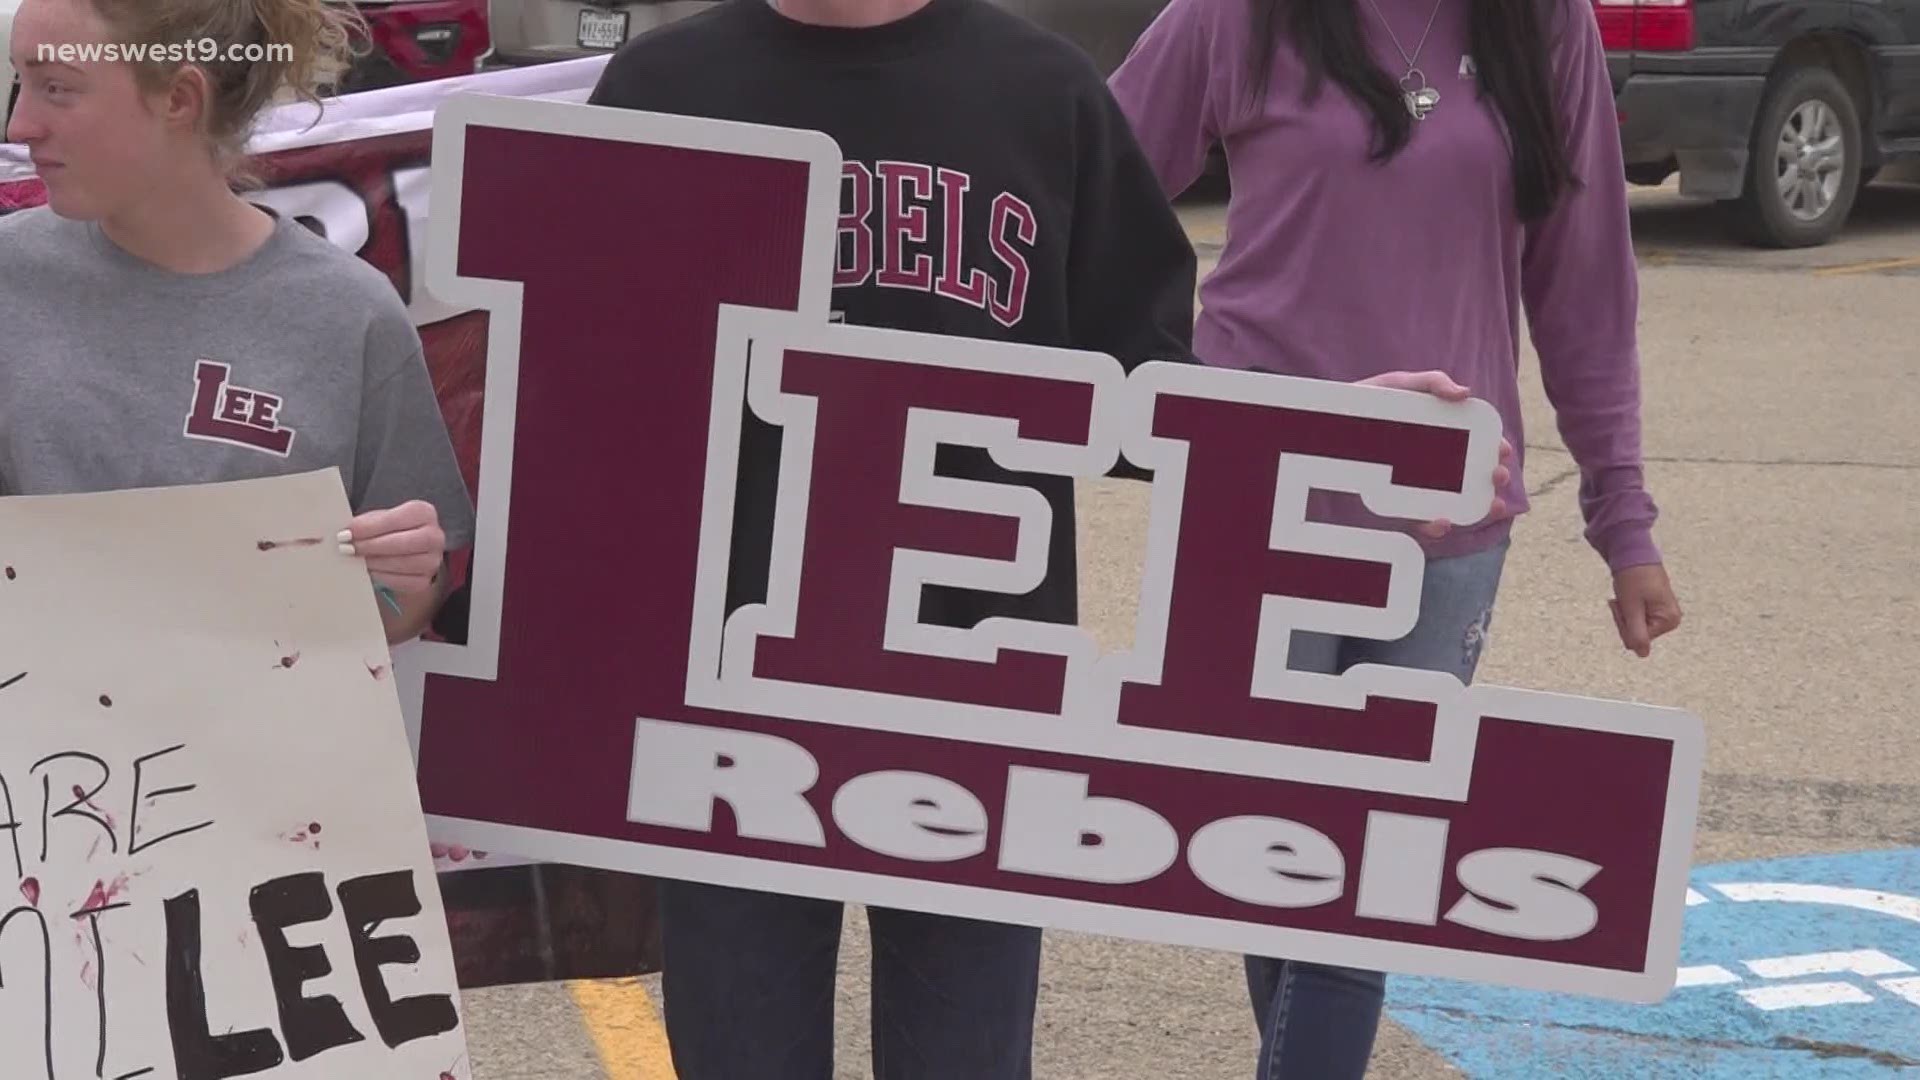 The renaming committee met at Lee High School to continue their discussions about changing the name of the school, they were joined by students in protest.